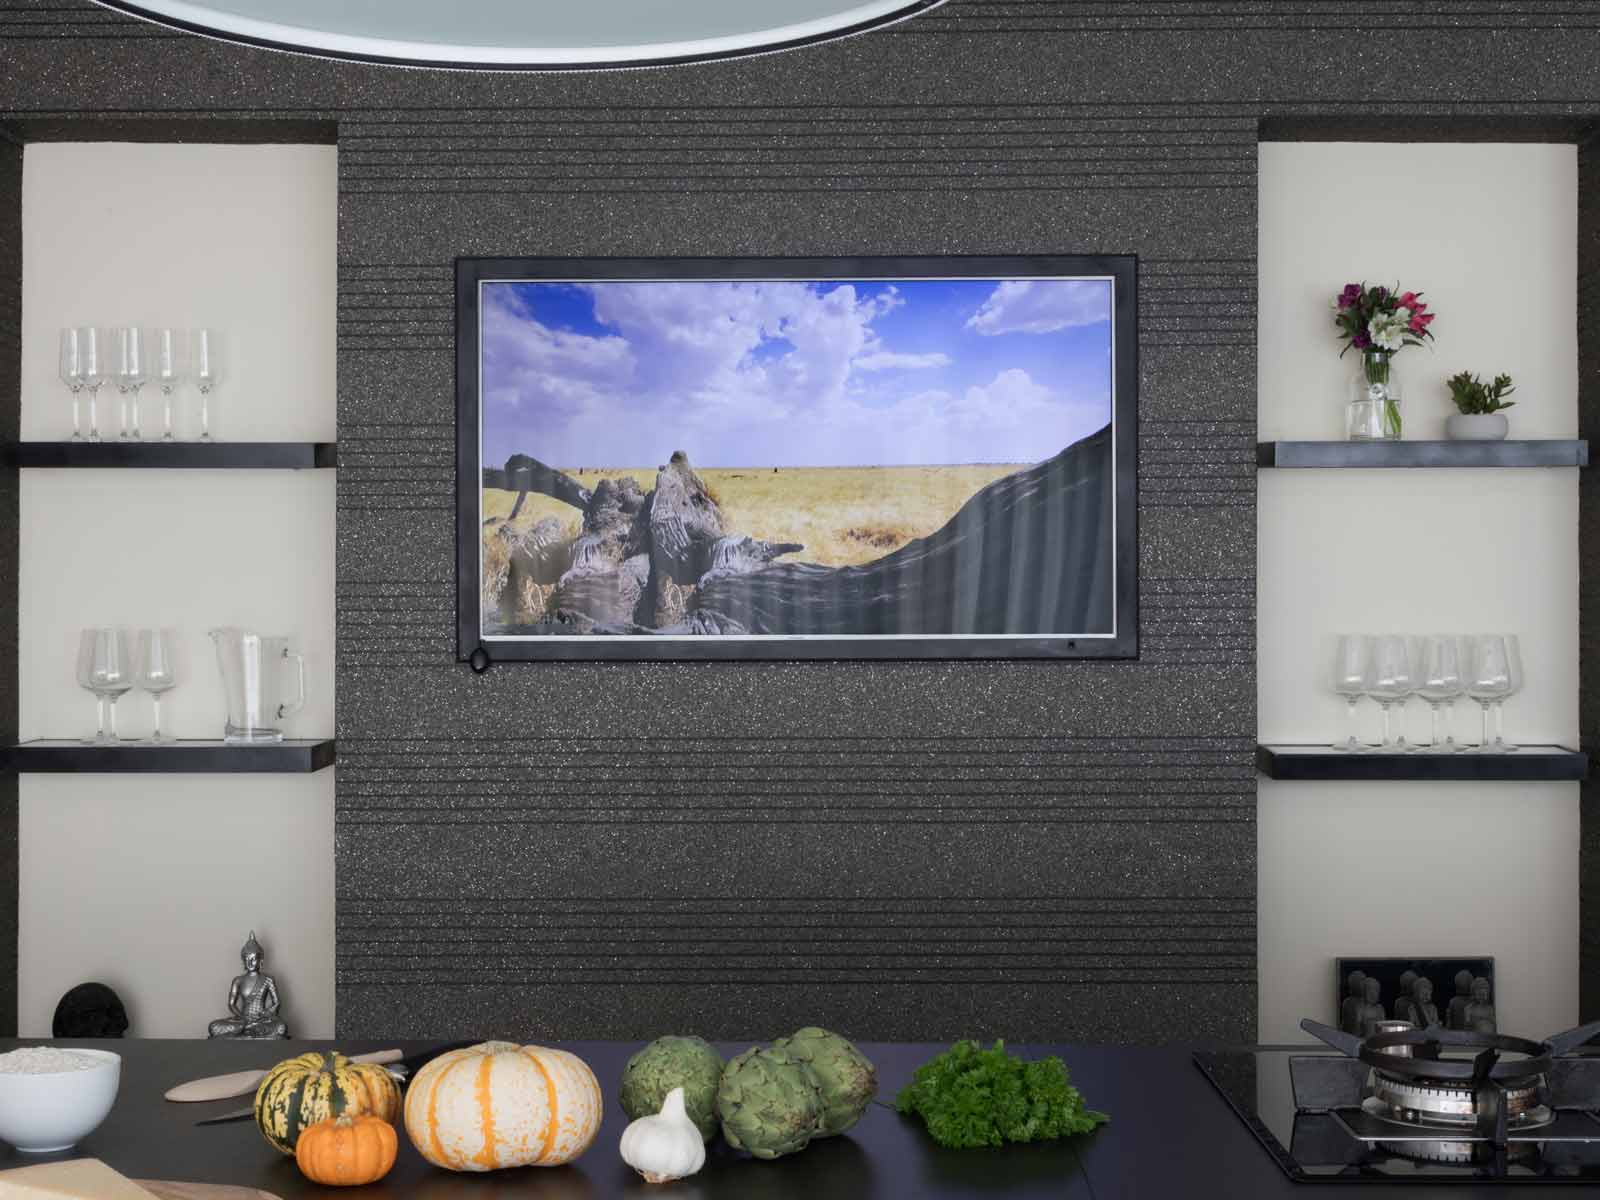 A simple media wall set opposite a kitchen island for a family